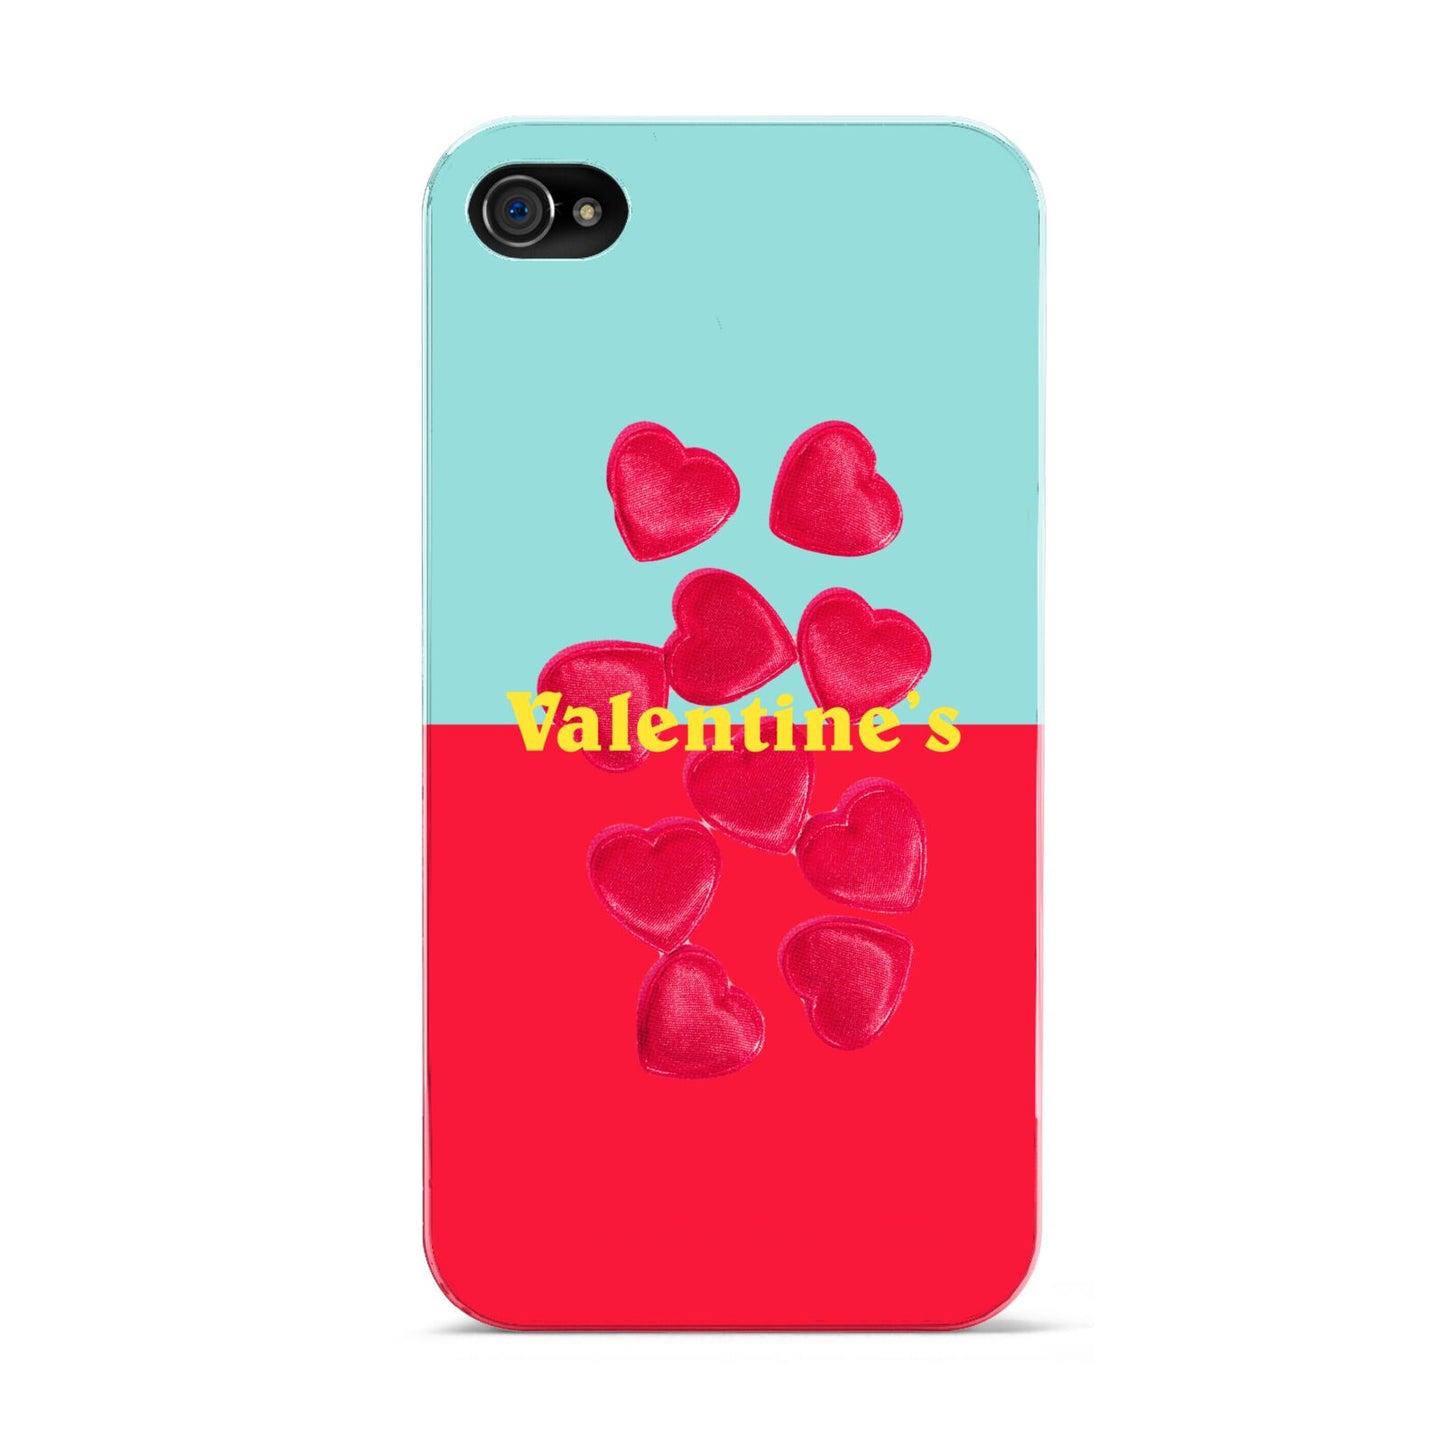 Valentines Sweets Apple iPhone 4s Case